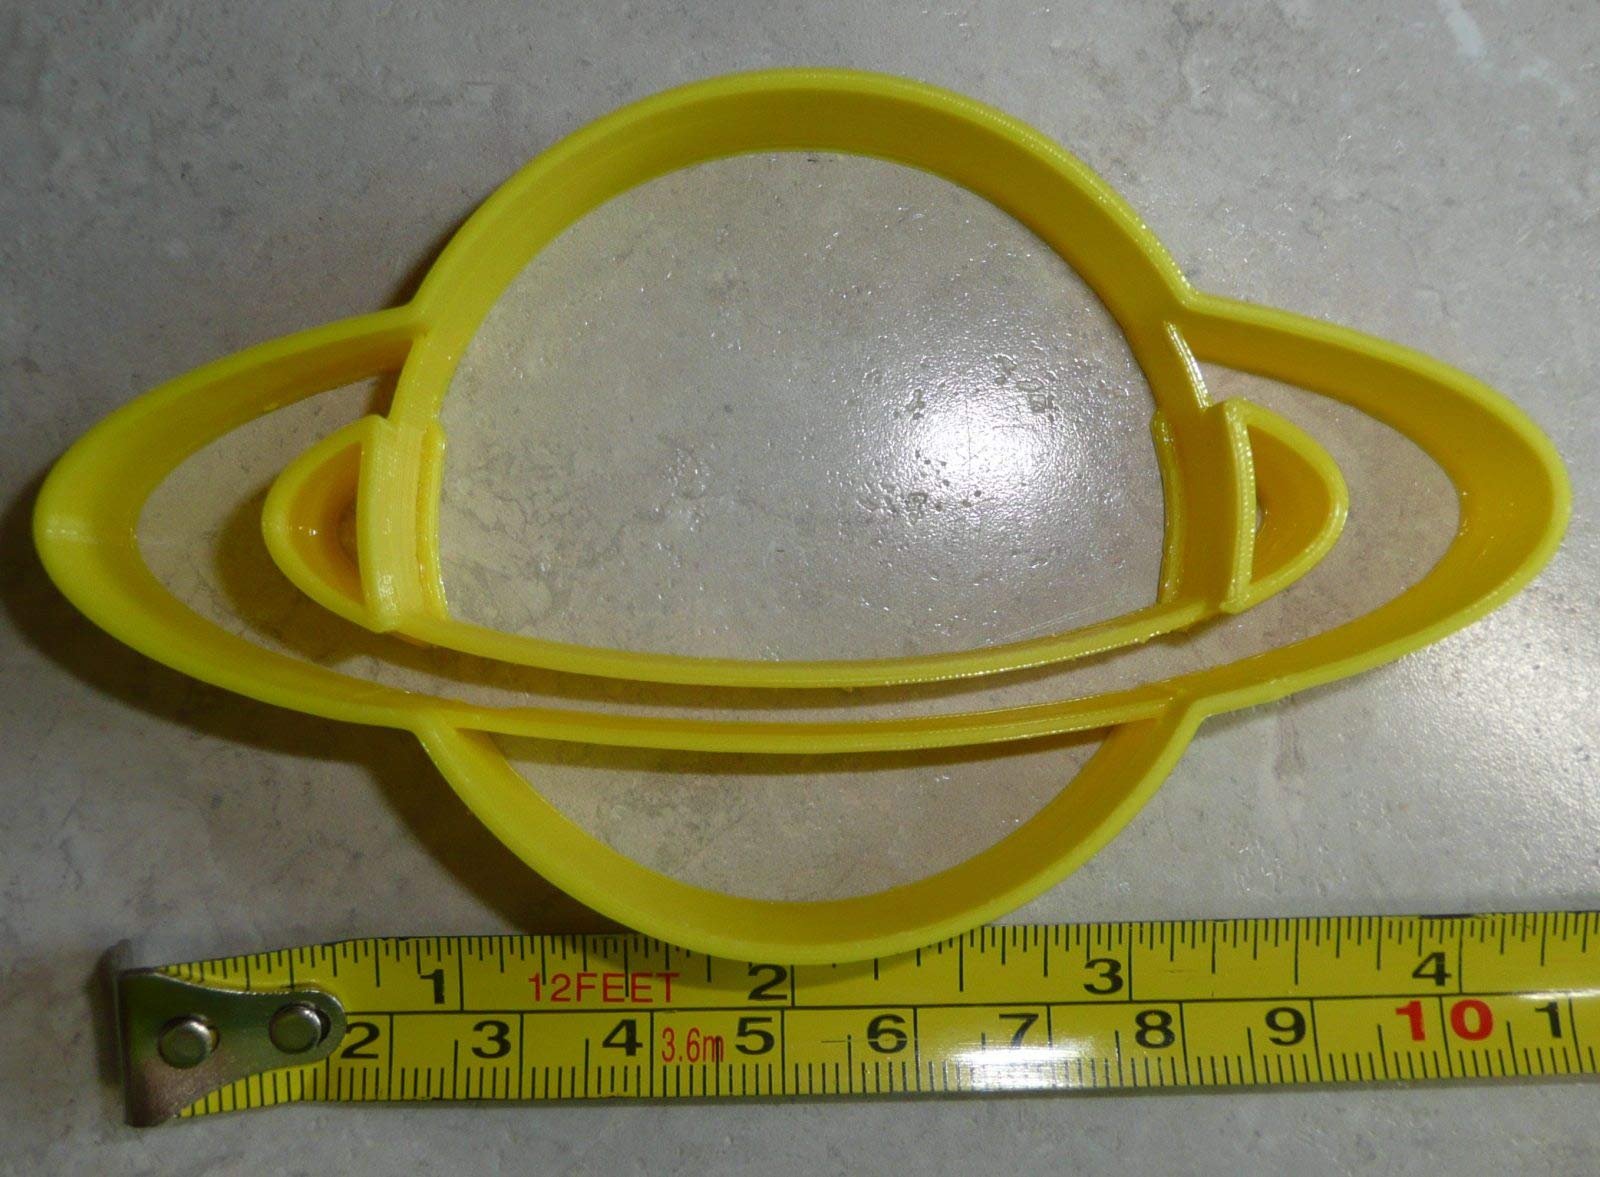 SATURN SIXTH 6TH PLANET WITH RINGS SOLAR SYSTEM COOKIE CUTTER MADE IN USA PR2205